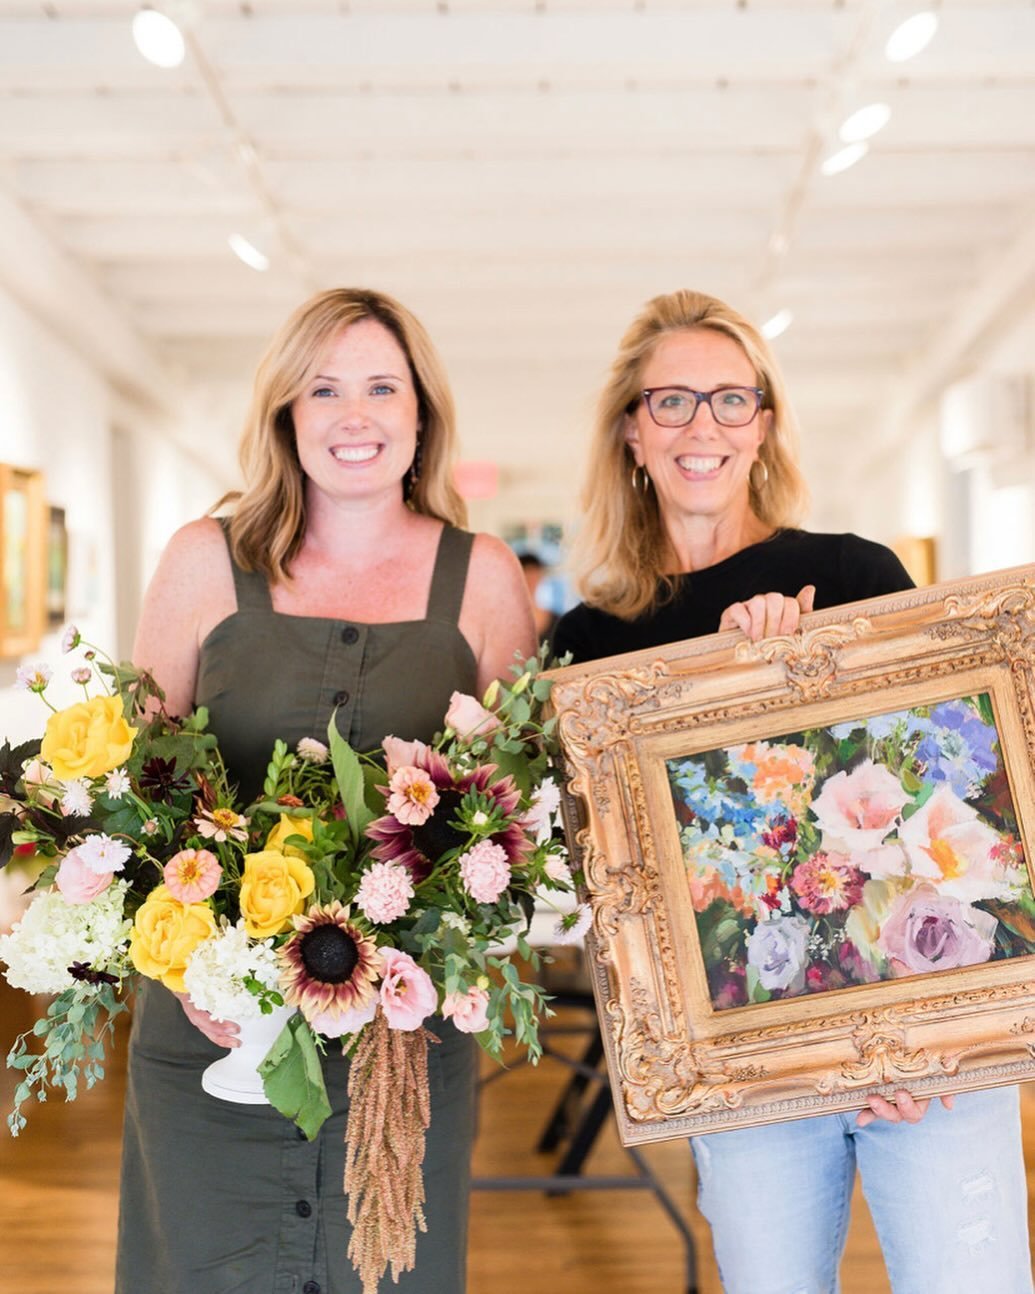 🌸🖼️🌸 Workshop Announcement!  We&rsquo;re back!  Floral design superstar @jenniferdesignsevents and I are back together for another floral design and painting workshop @gallery222malvern .

Saturday June 22

12 spots available.  Enroll now @gallery